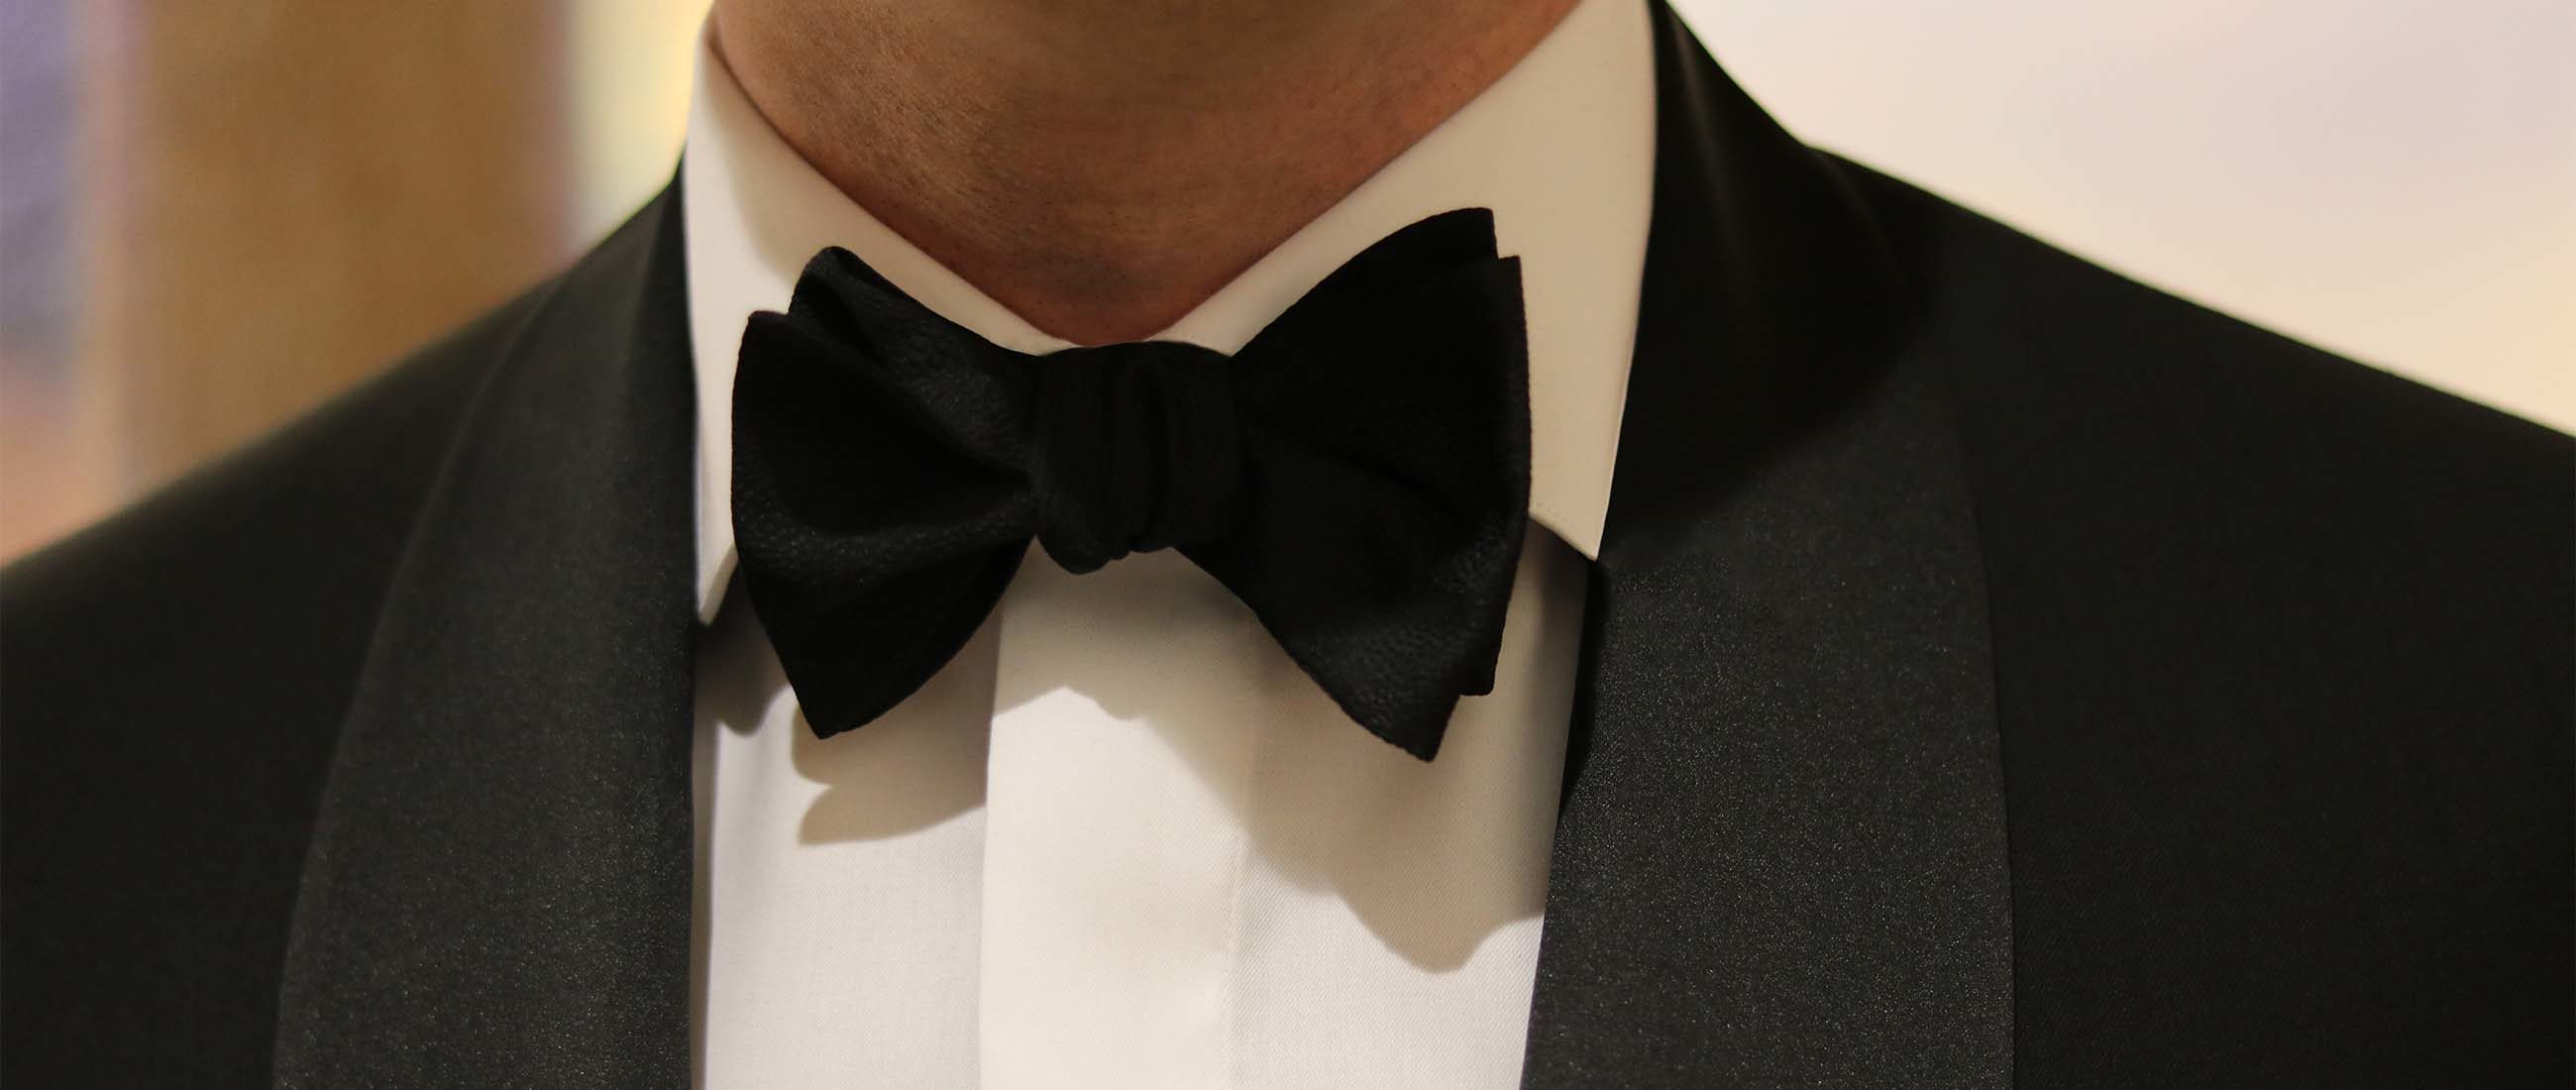 How to: tie your bow tie